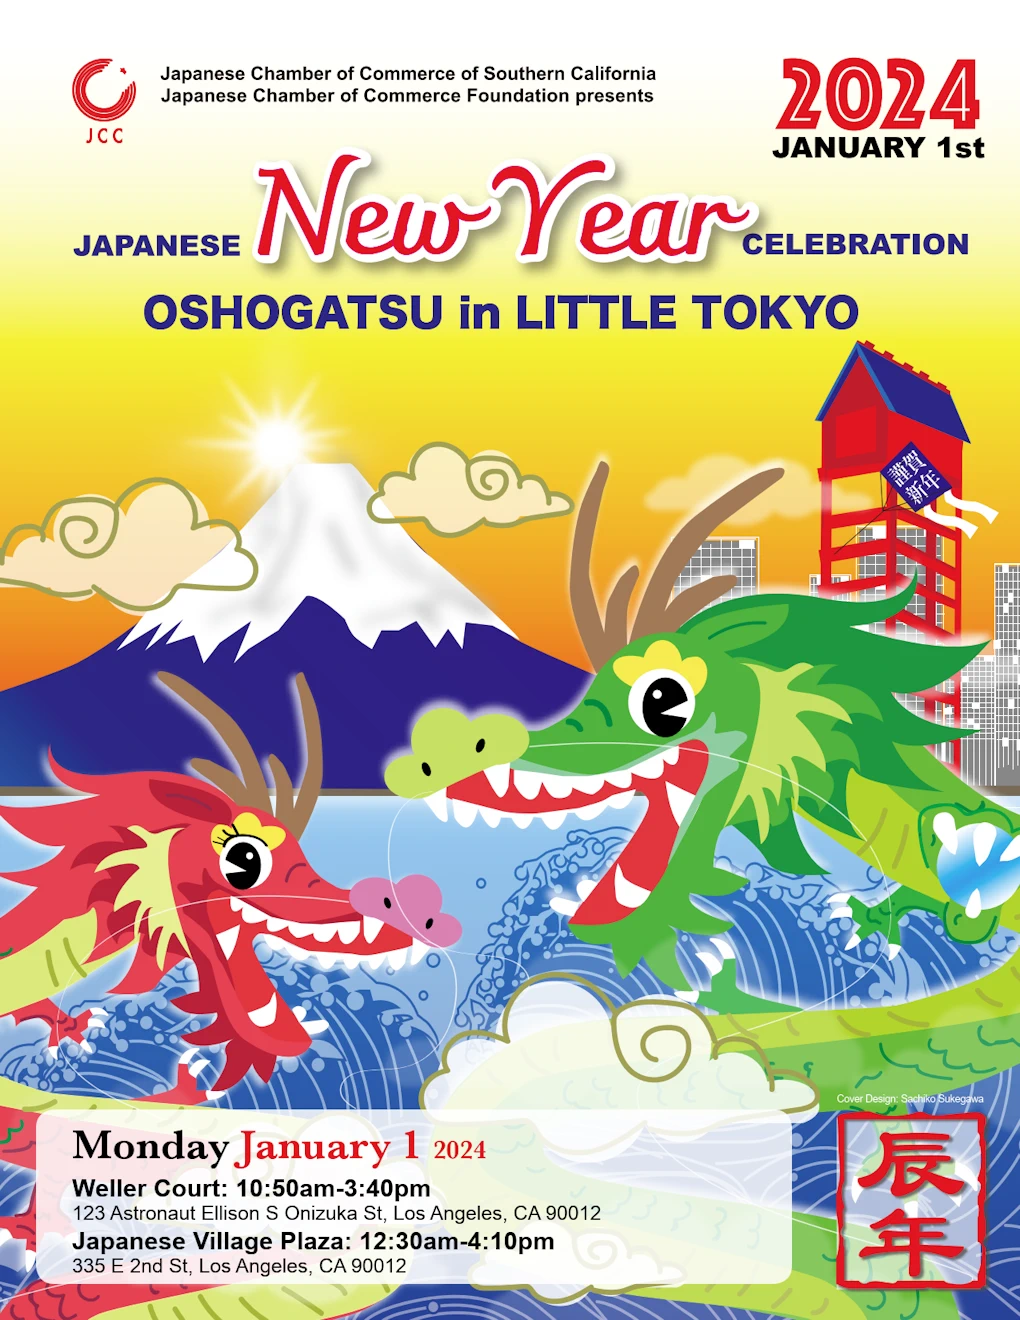 2024 - 25th Annual Japanese New Year's Oshogatsu Festival Event - Little Tokyo (2 Locations - Jan 1st, 2024) Entertainment - Update Coming